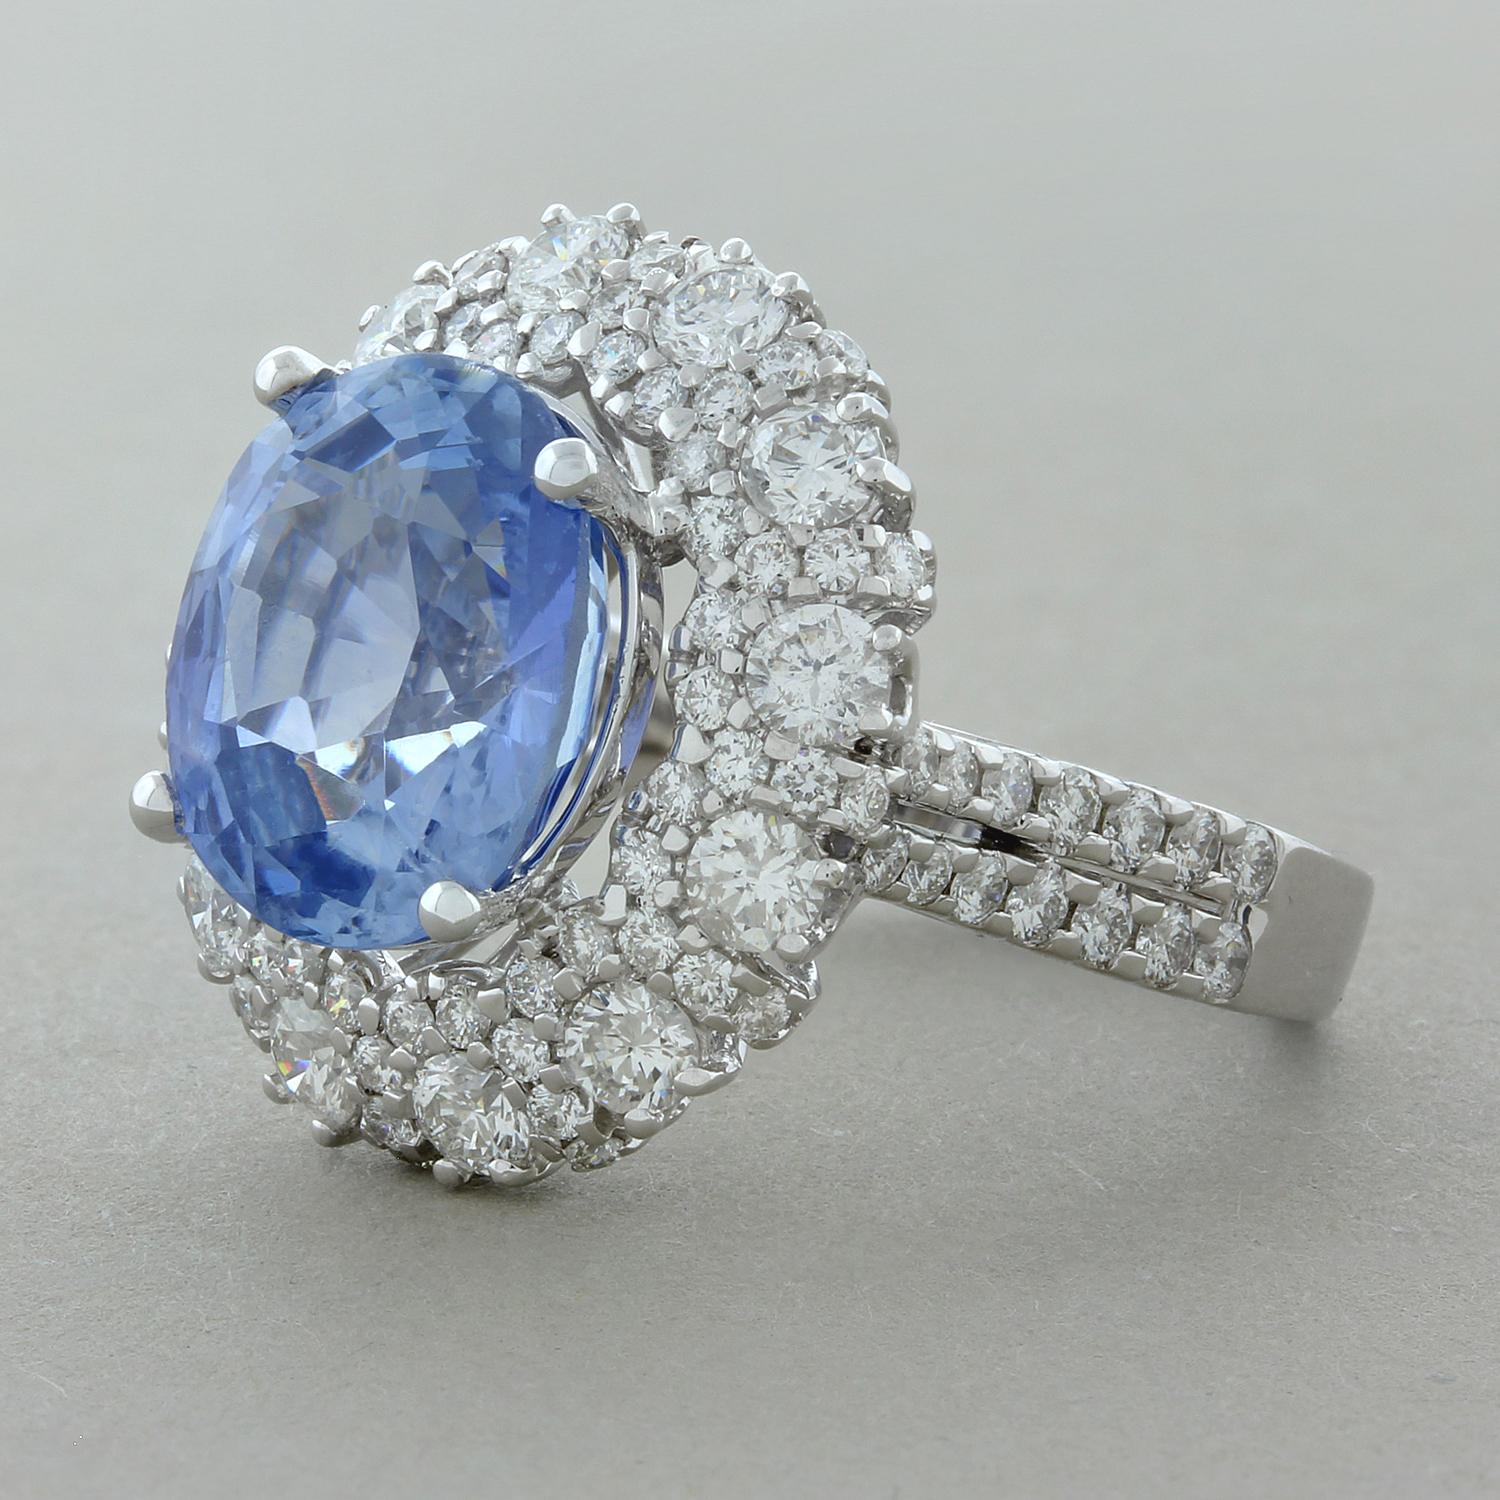 This glamorous ring features a 7.43 carat oval shaped blue sapphire with a beautiful sky-blue color. The sapphire is accented by a double halo of 2.00 carats of round brilliant cut diamonds set in 14K white gold.

Ring Size 6.5 (Sizable)
